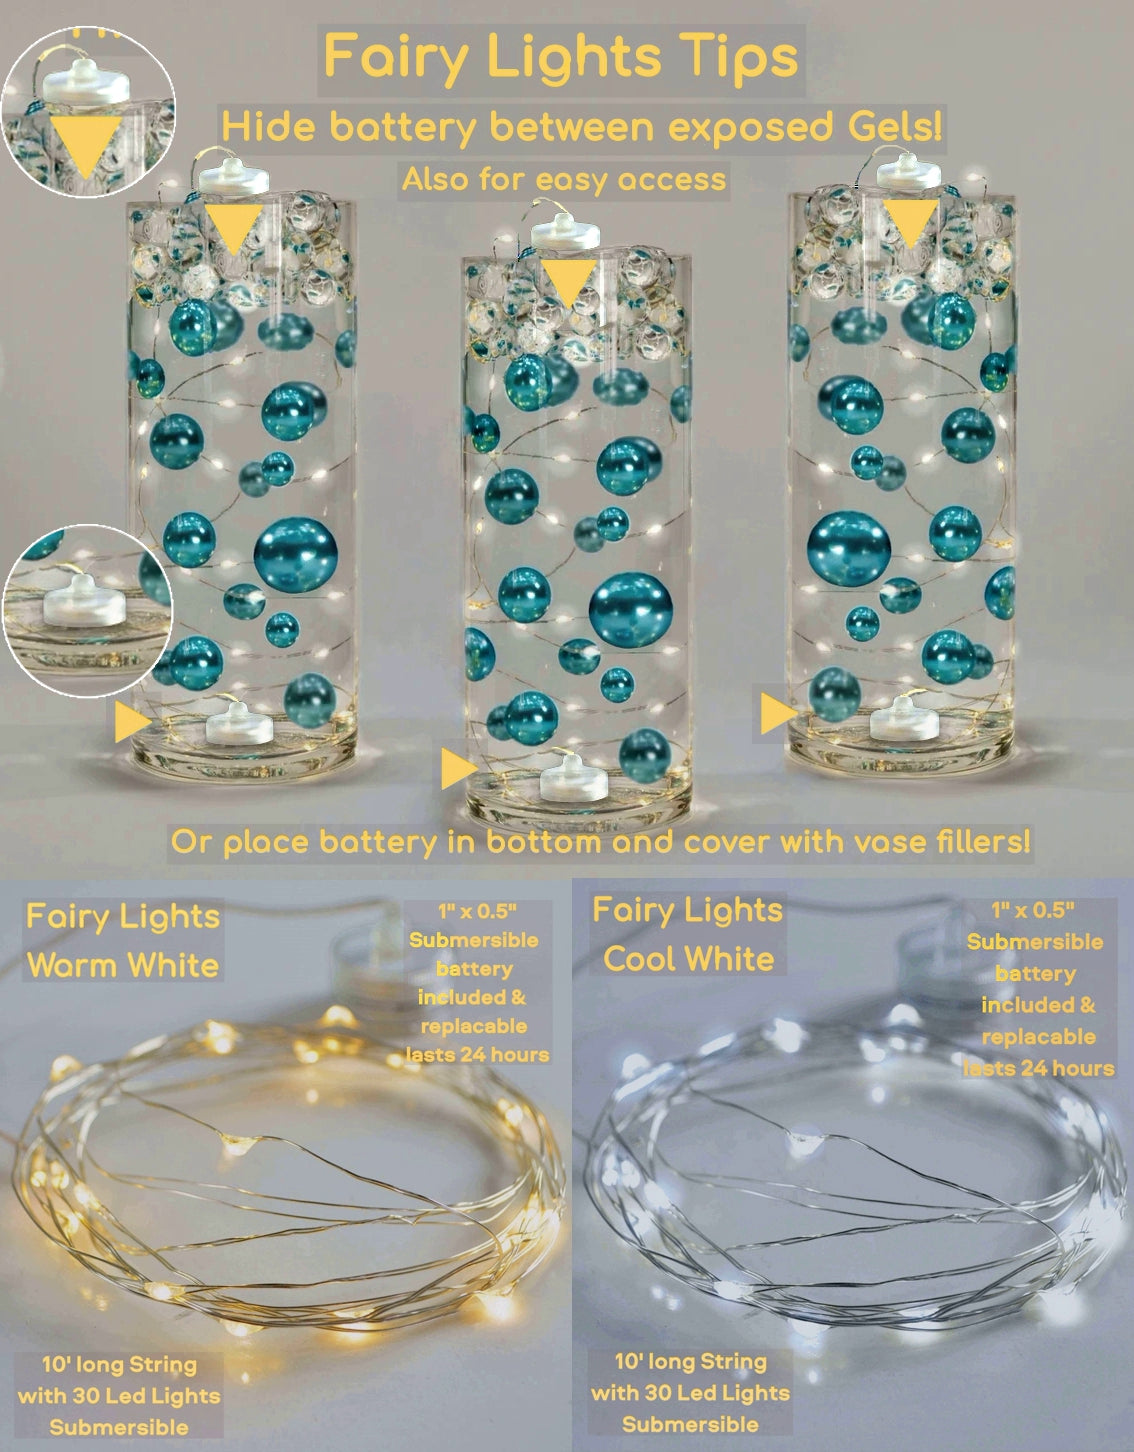 Floating Silver Pearls-Fills 1 Gallon of Floating Pearls & Transparent Gels for the Floating Effect-With Measured Gels Prep Bag-Option 3 Submersible Fairy Lights Strings